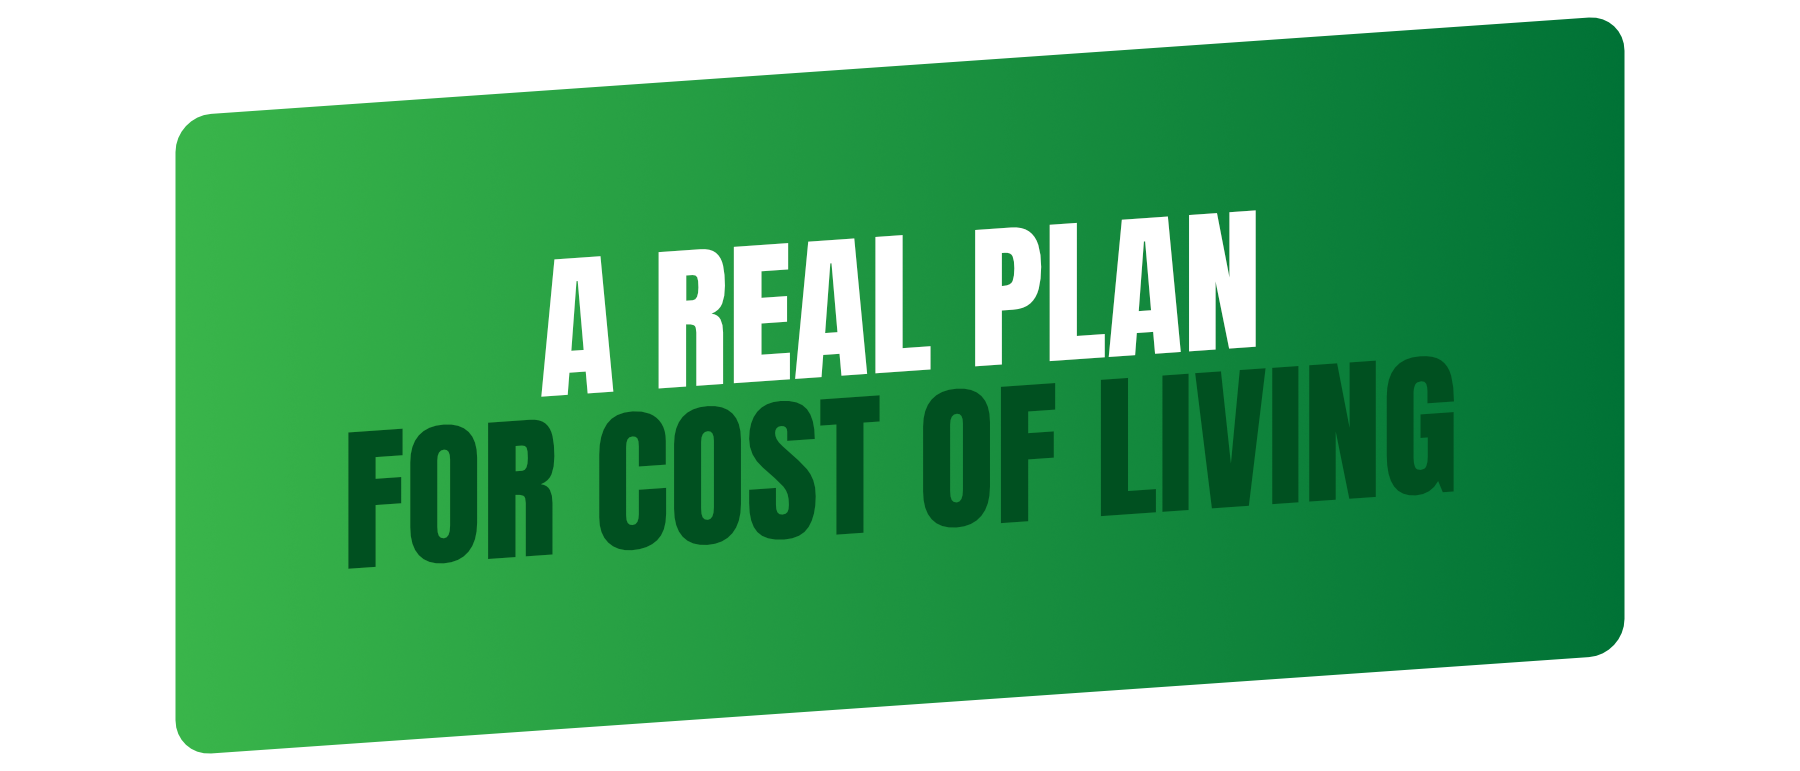 'A Real Plan for Cost of Living'